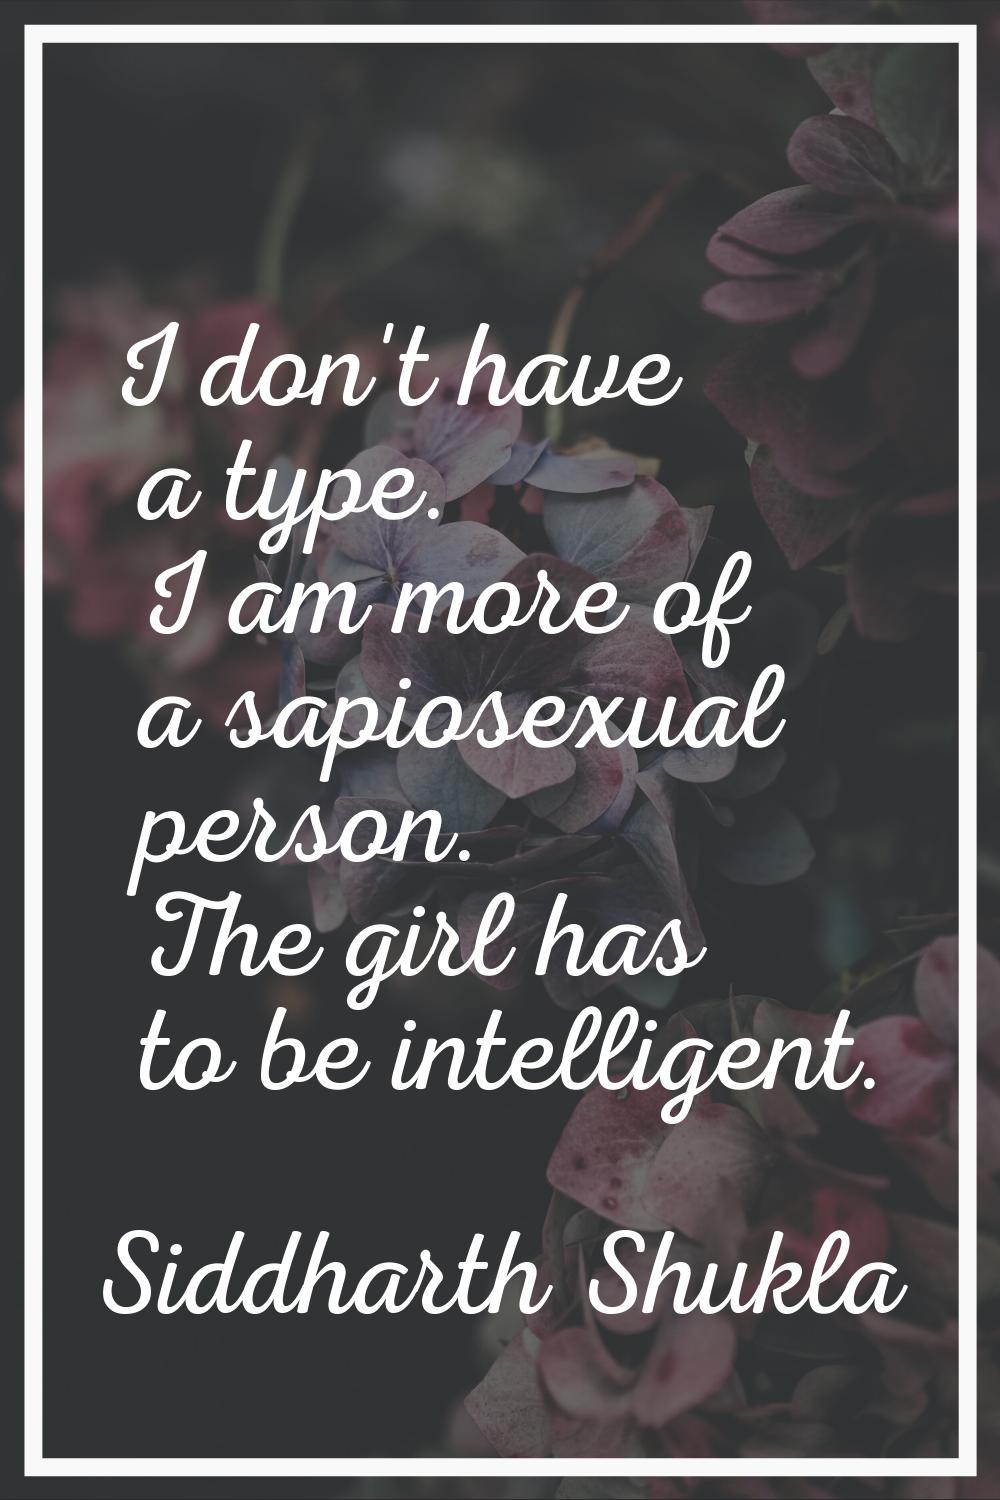 I don't have a type. I am more of a sapiosexual person. The girl has to be intelligent.